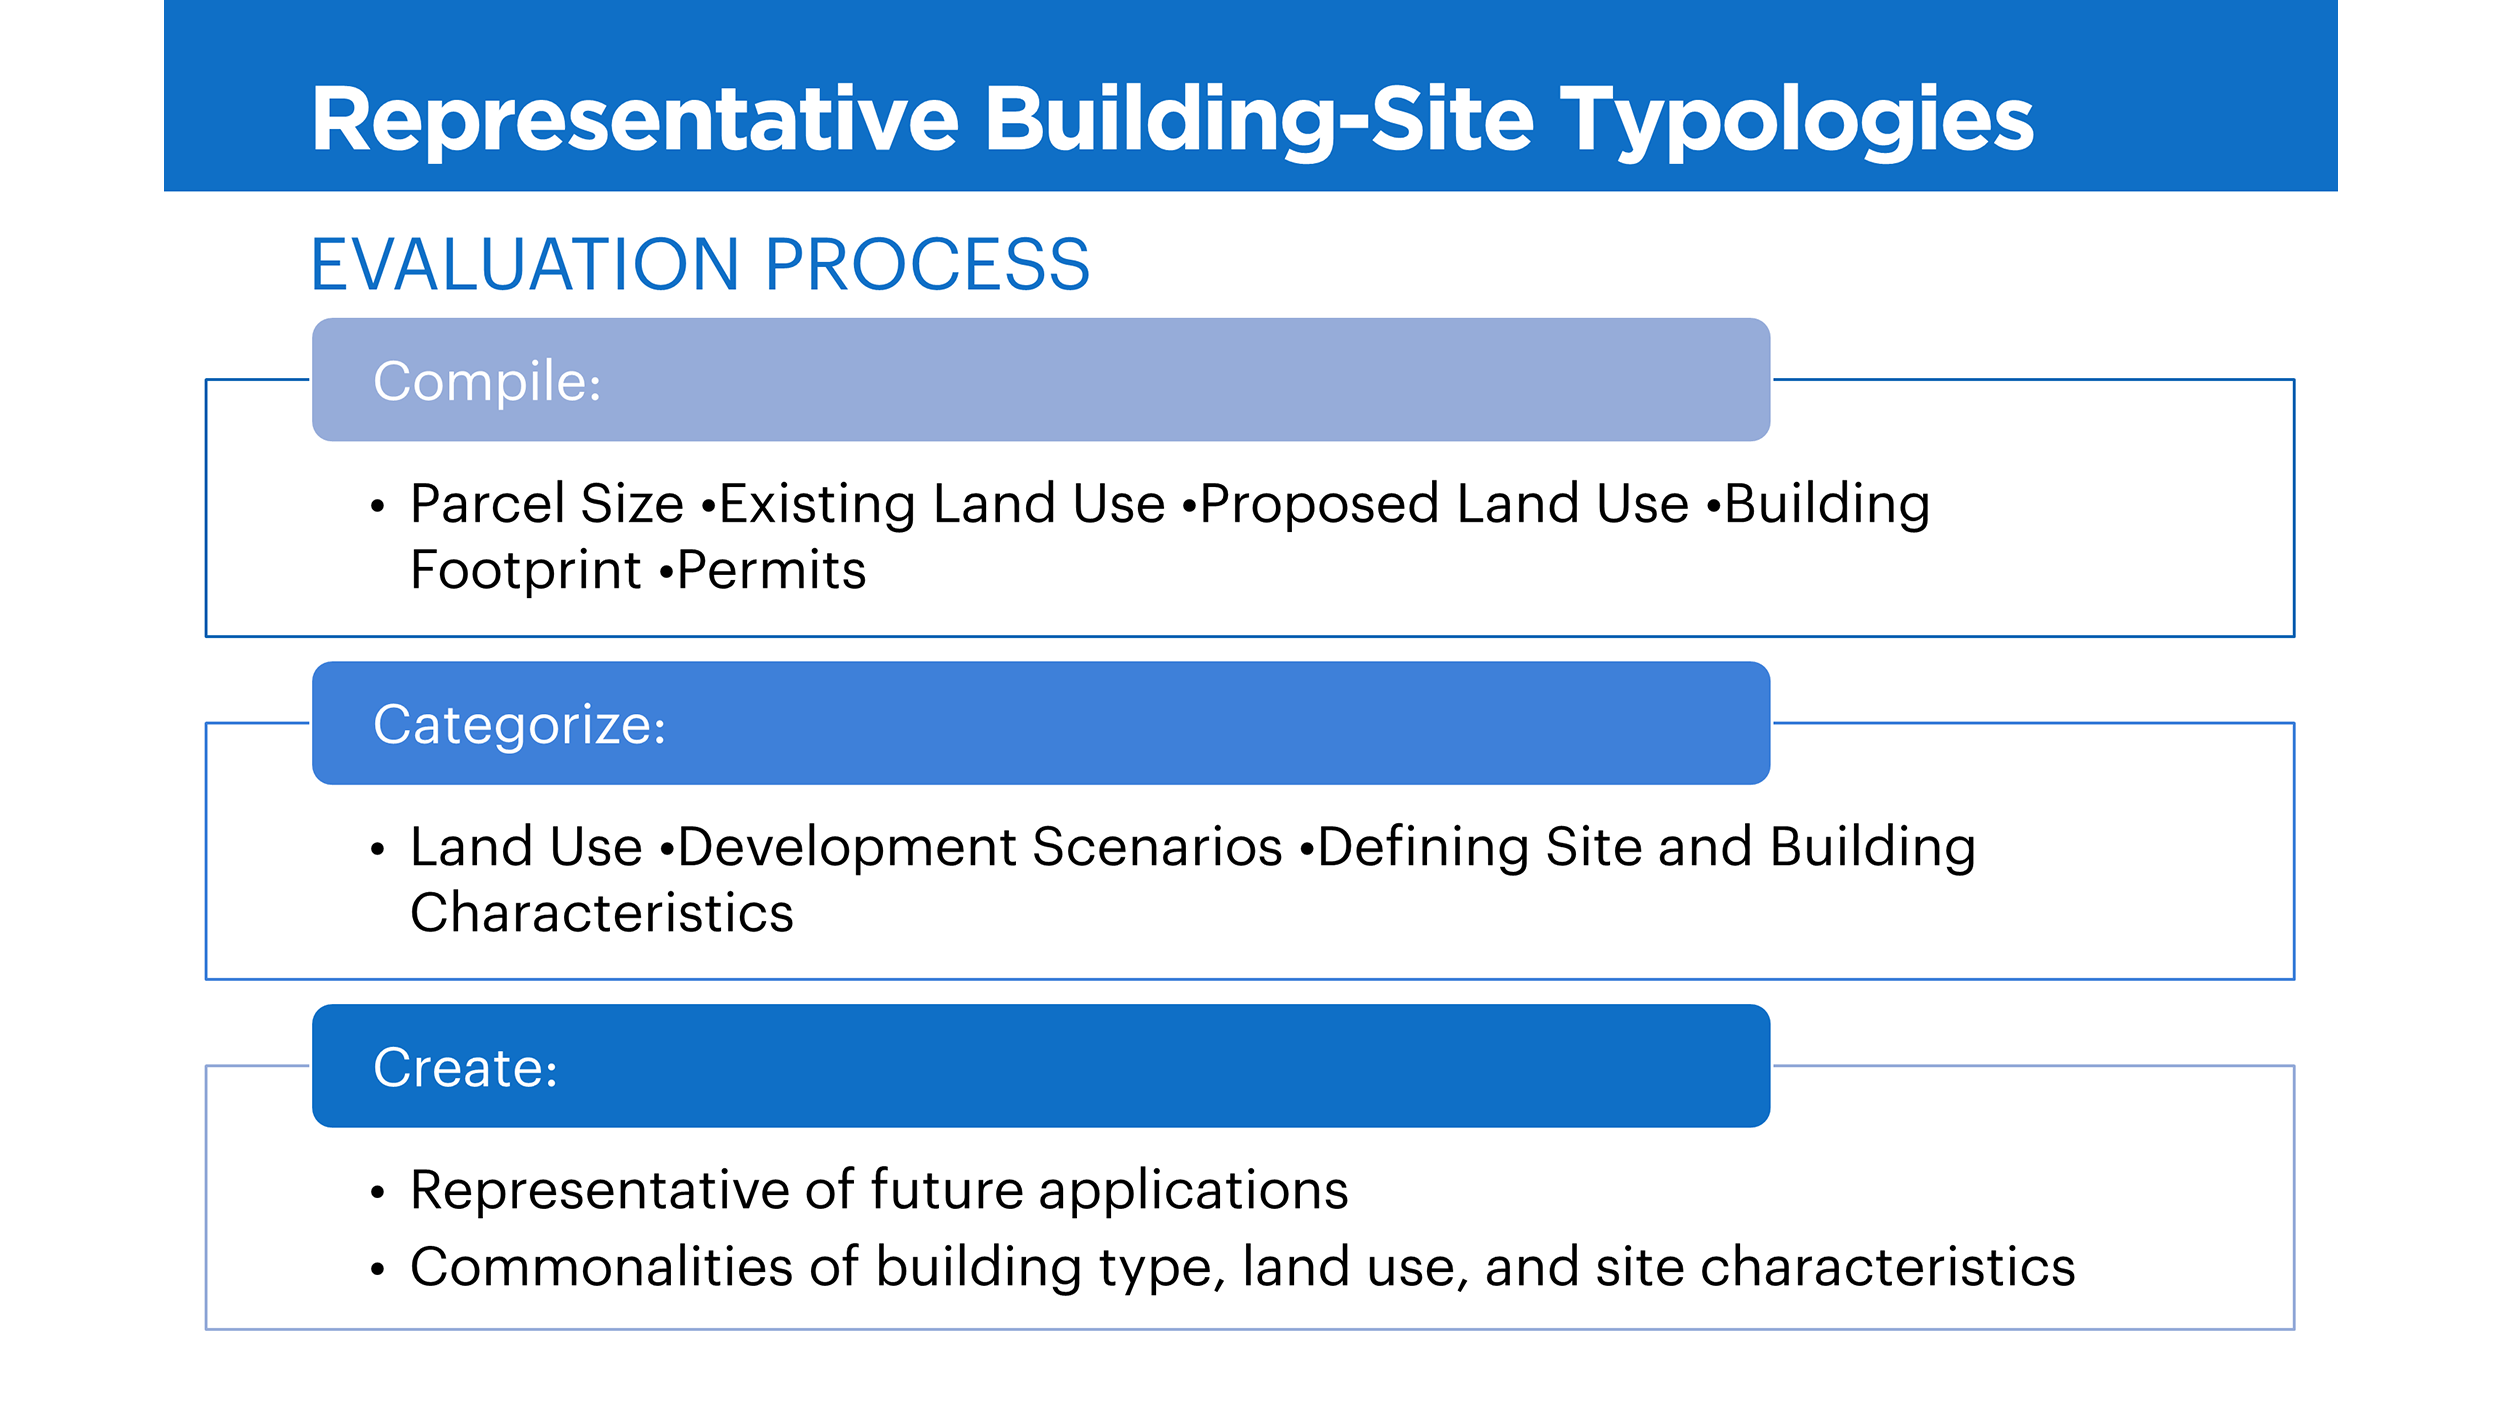 process for developing building-site typologies